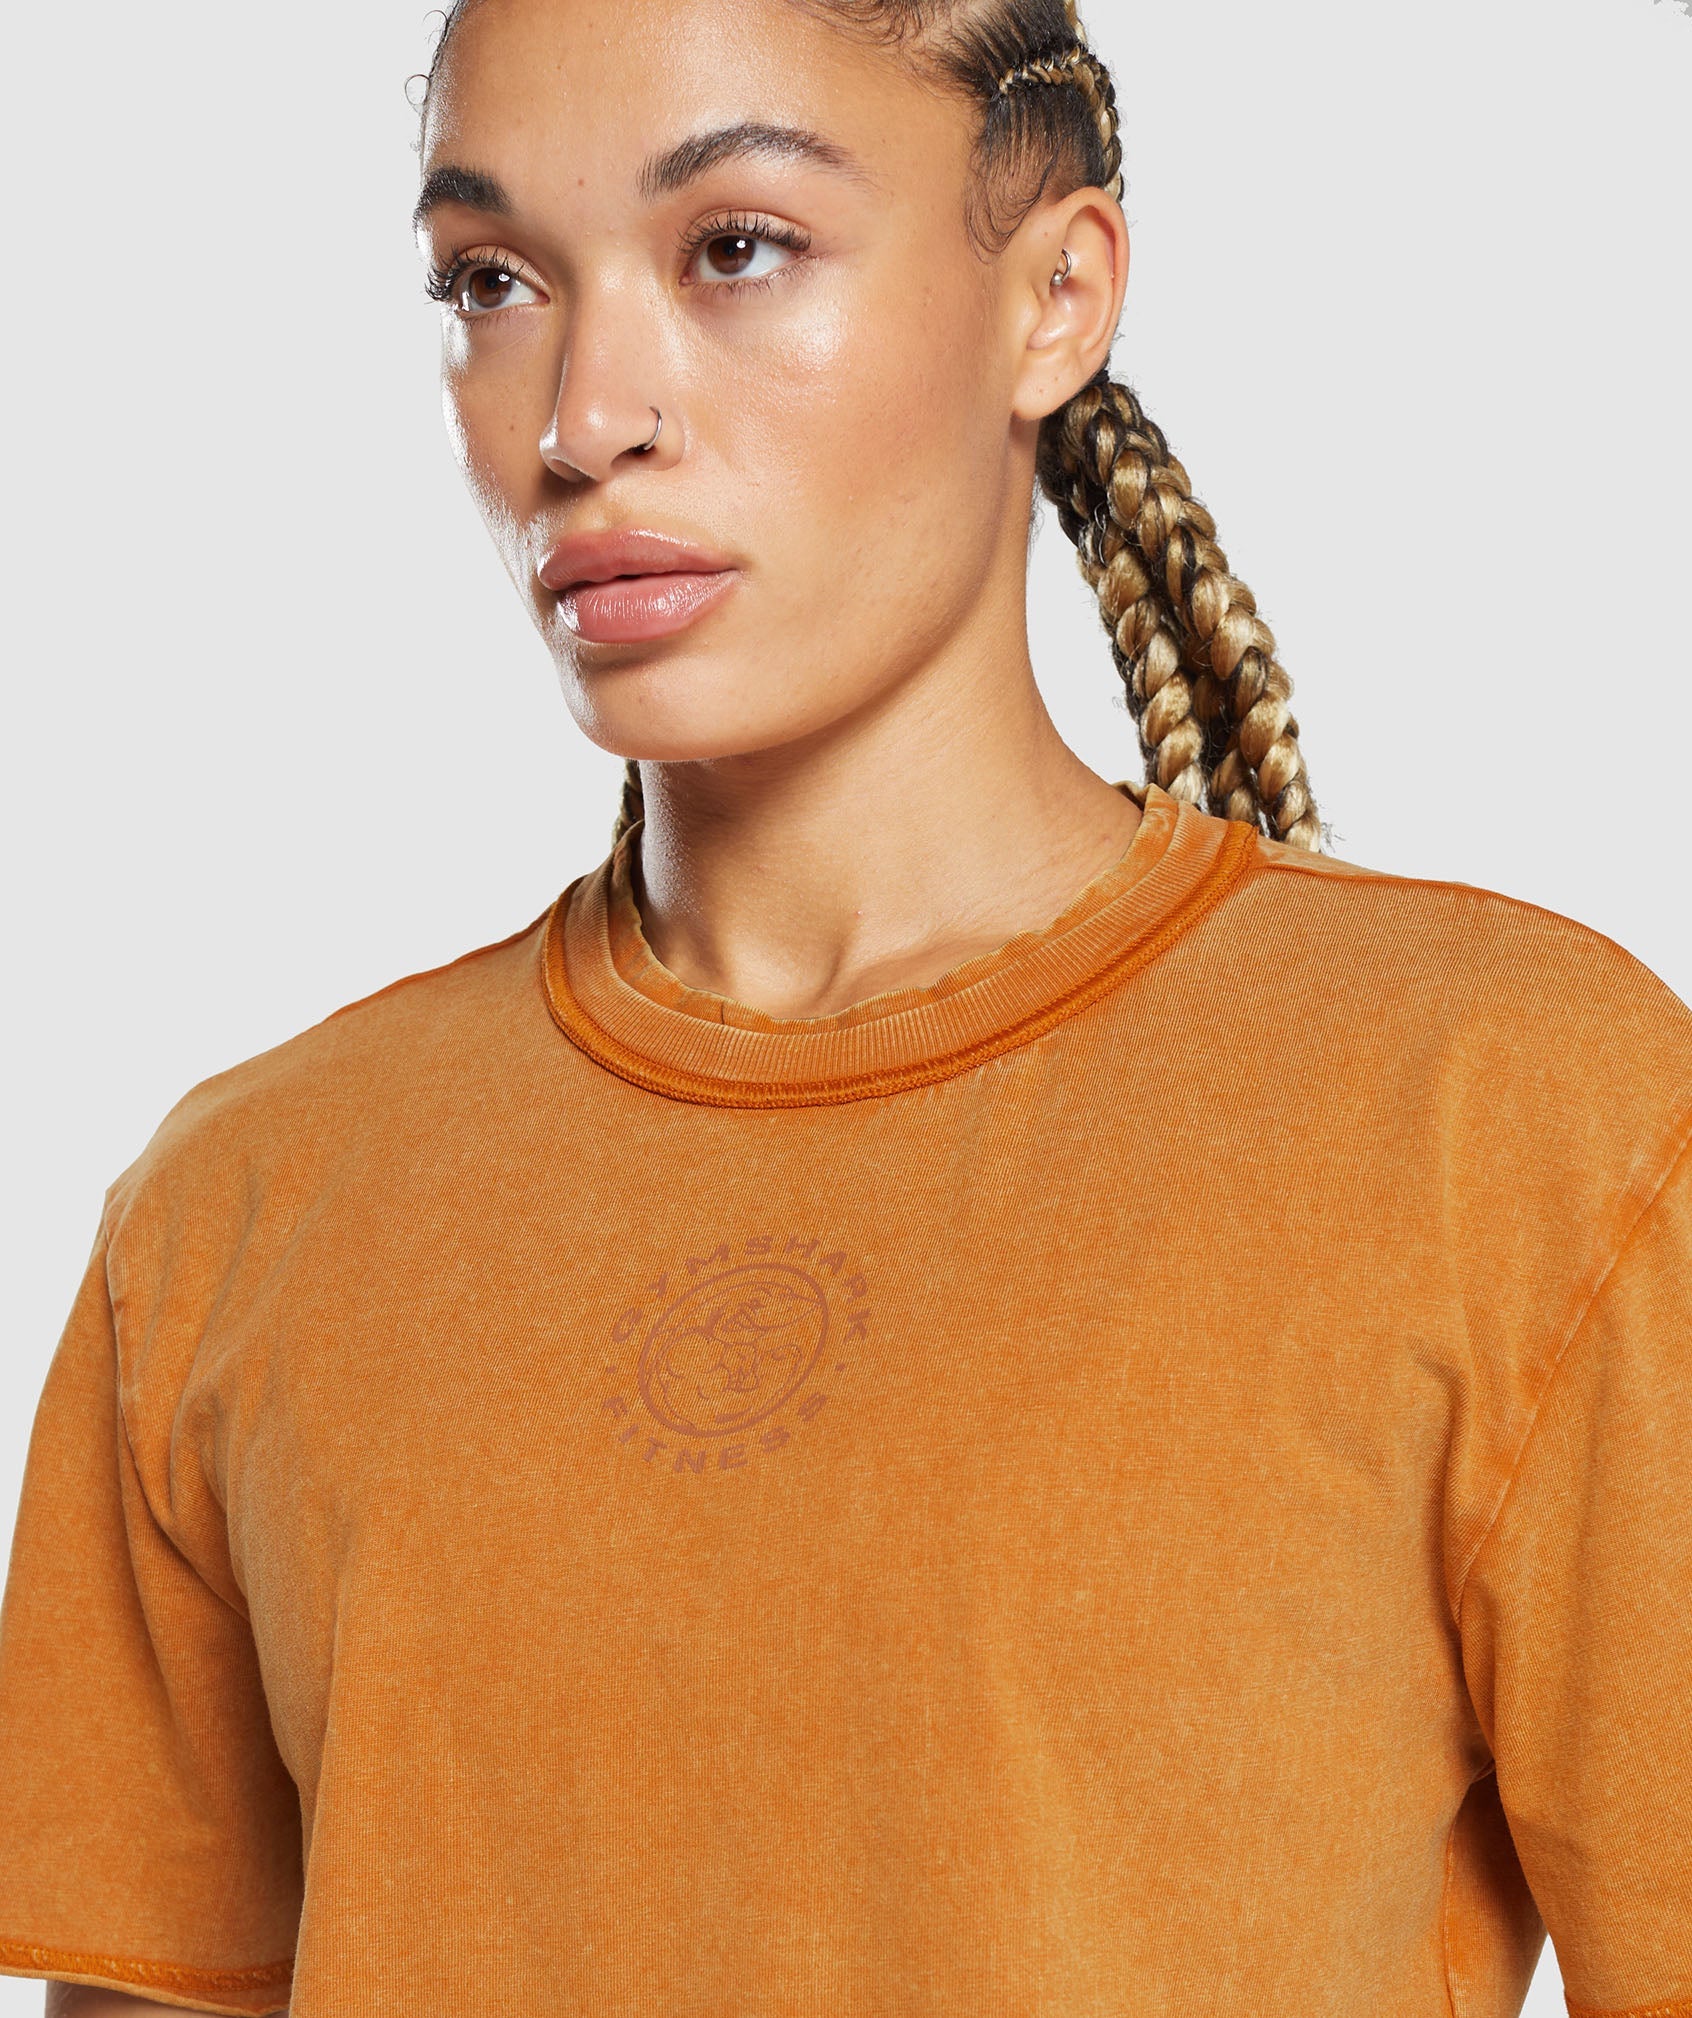 Legacy Washed Crop Top in Charred Orange - view 5